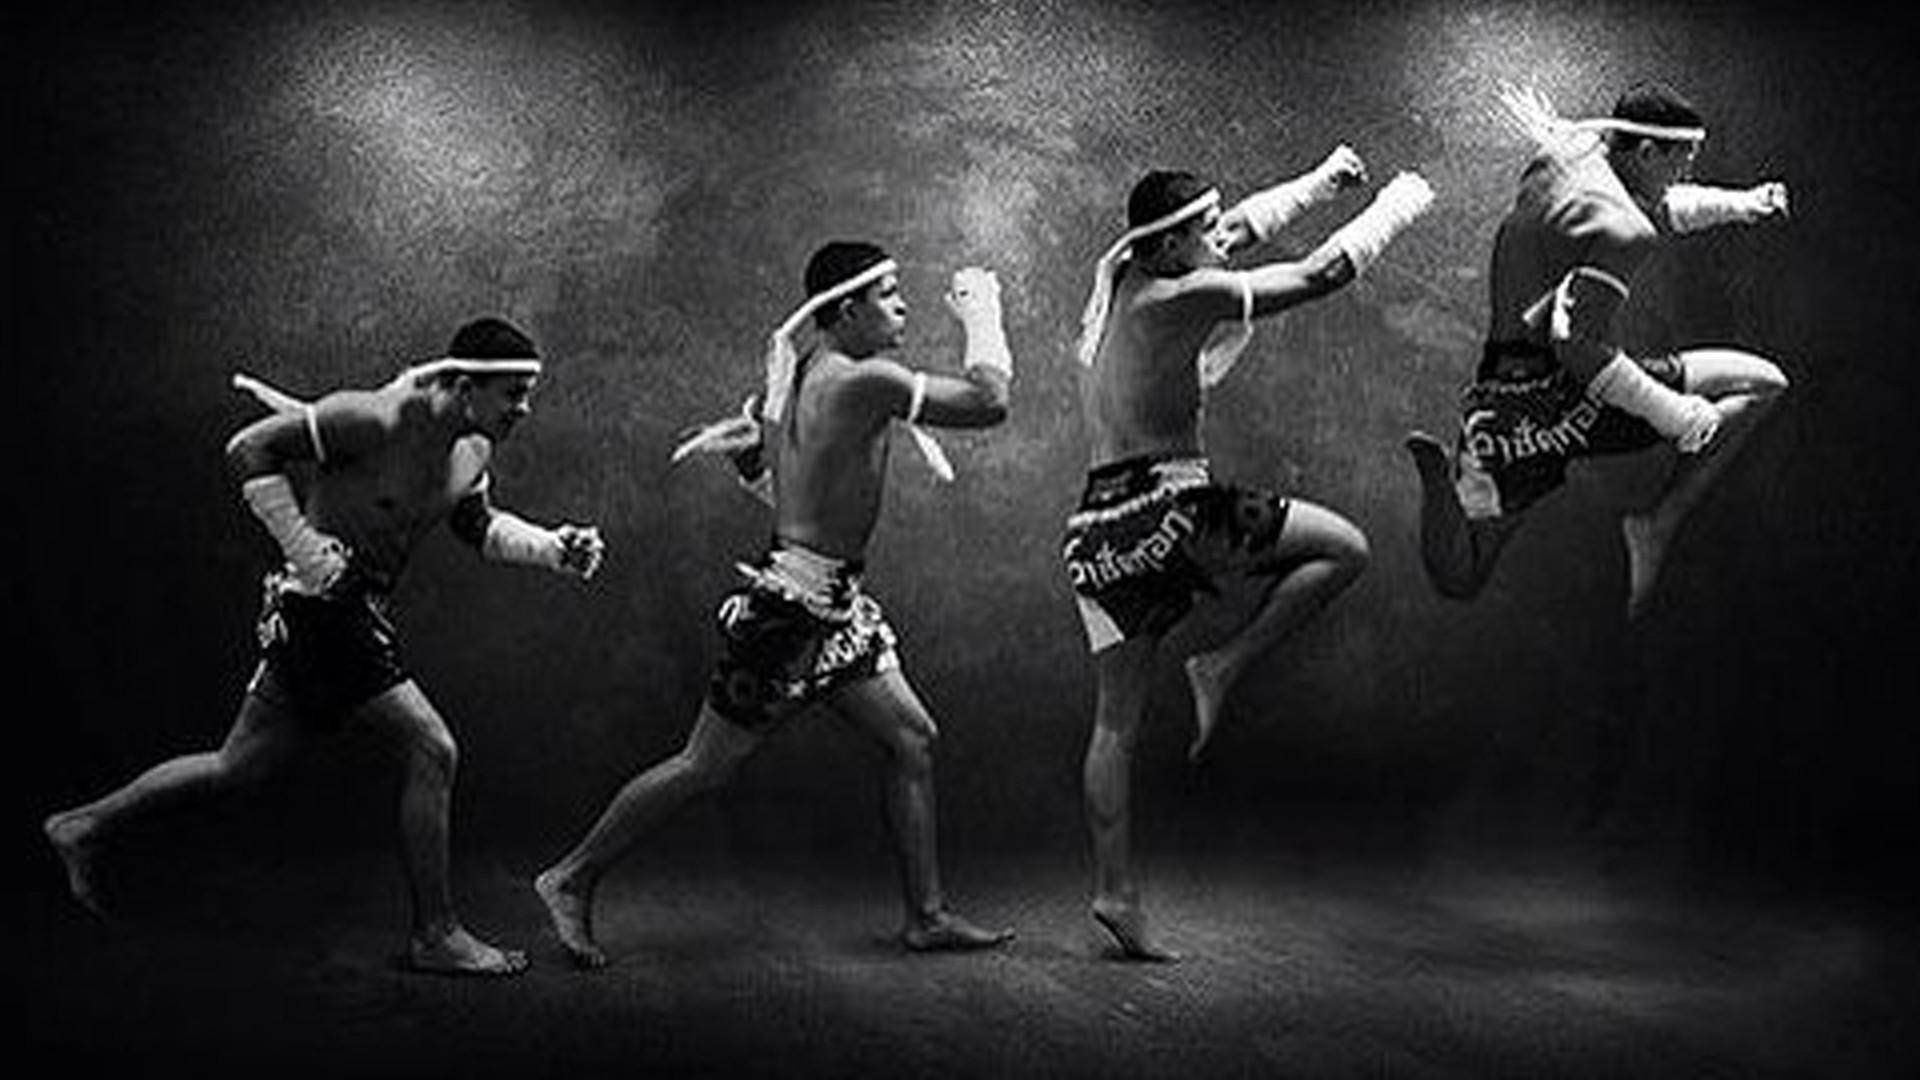 Thai kickboxing Wallpaper and Background Image